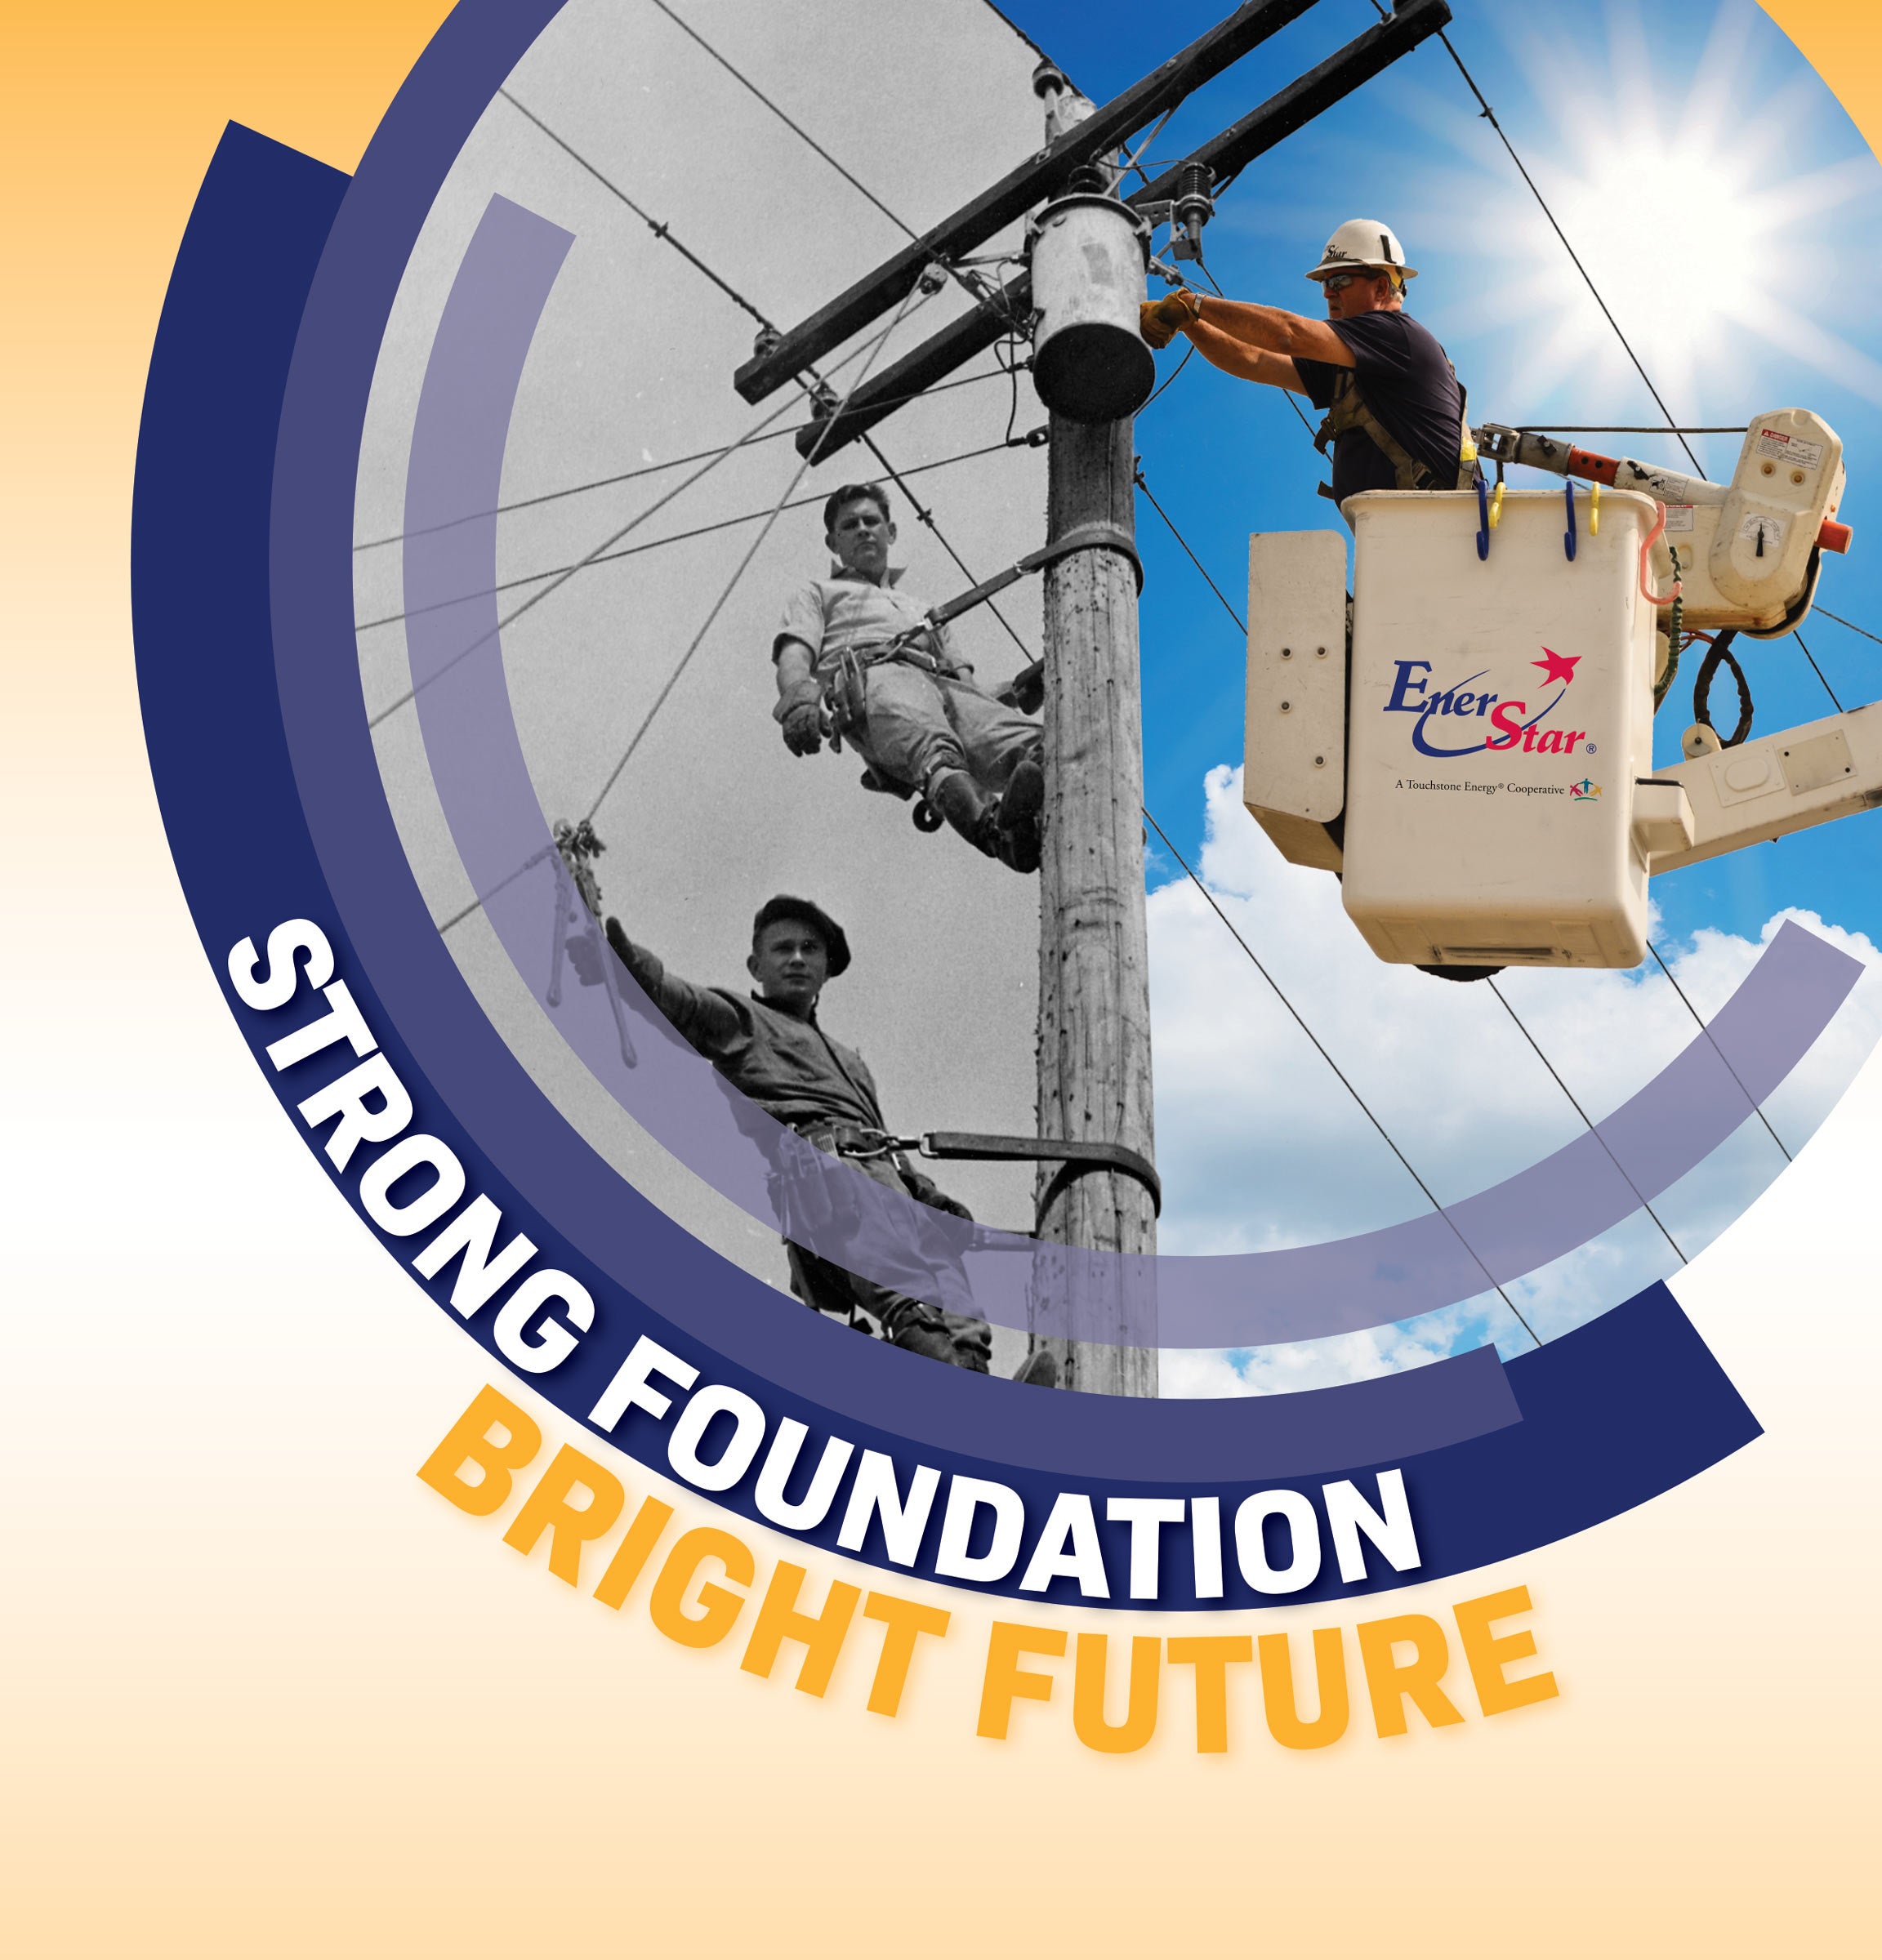 Strong Foundation Bright Future